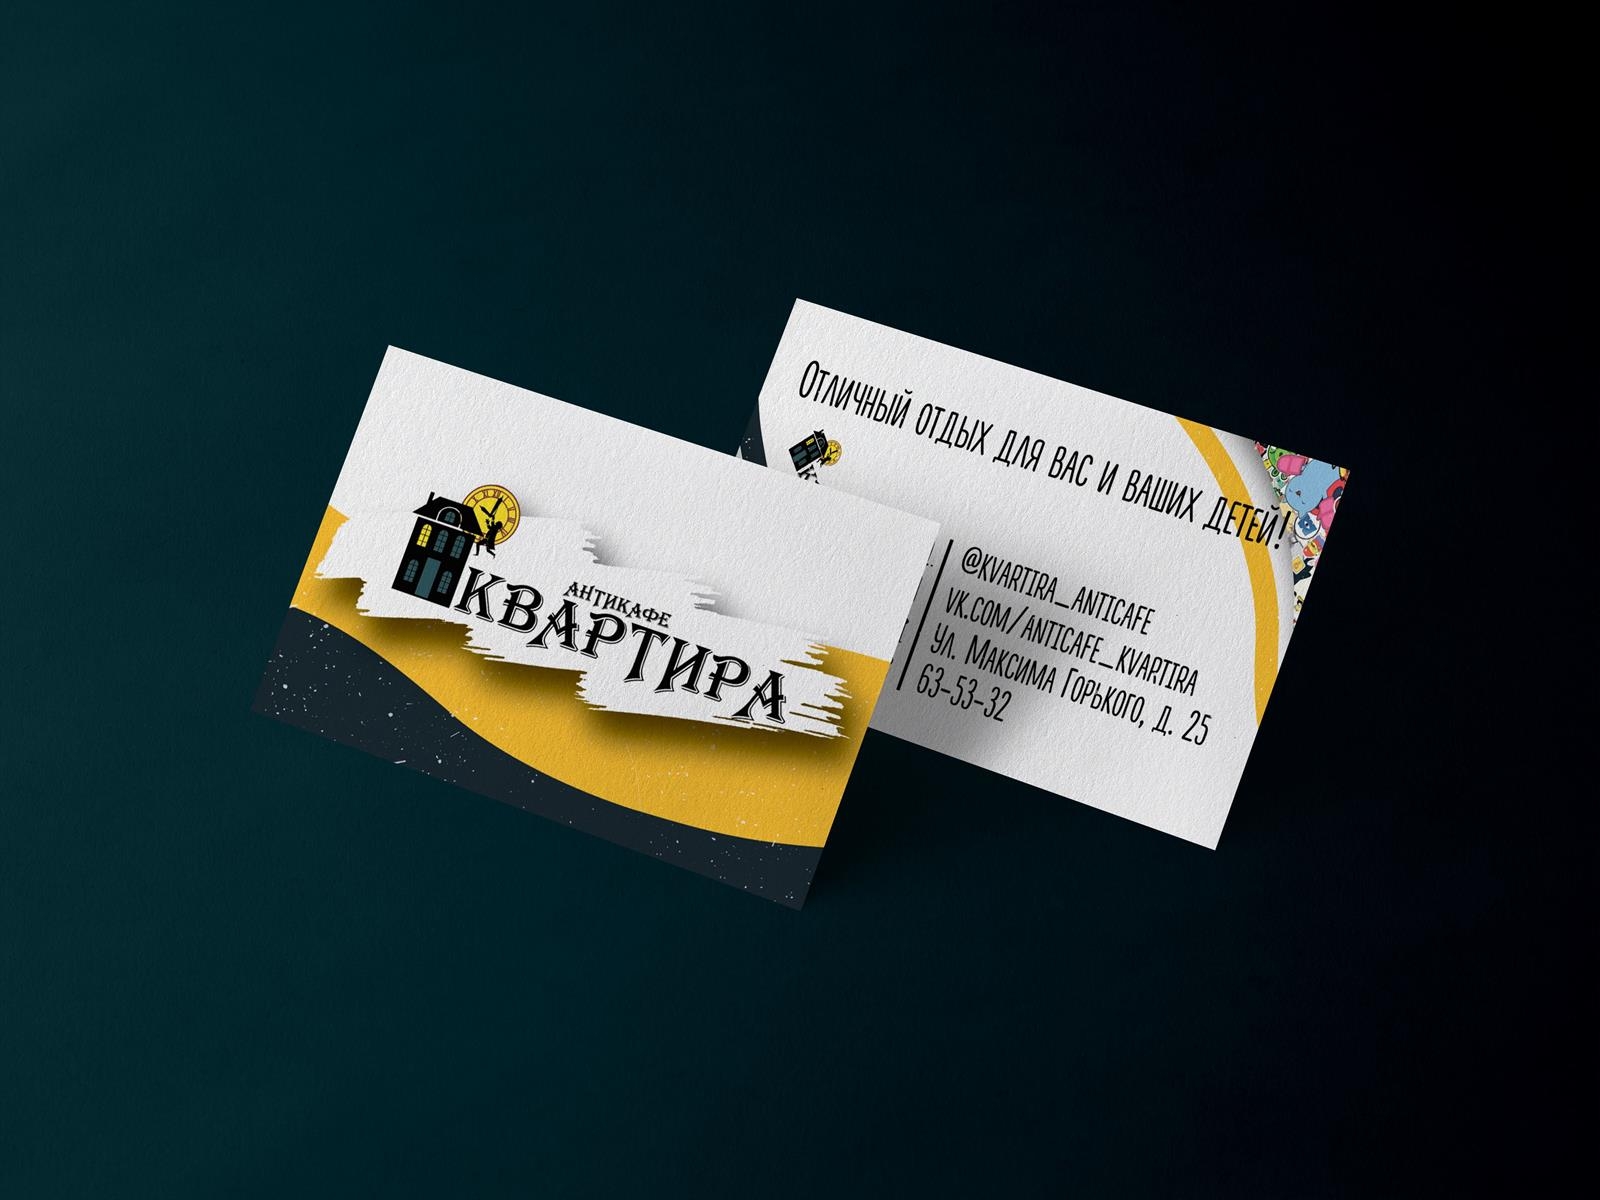 A business card for anti-cafe